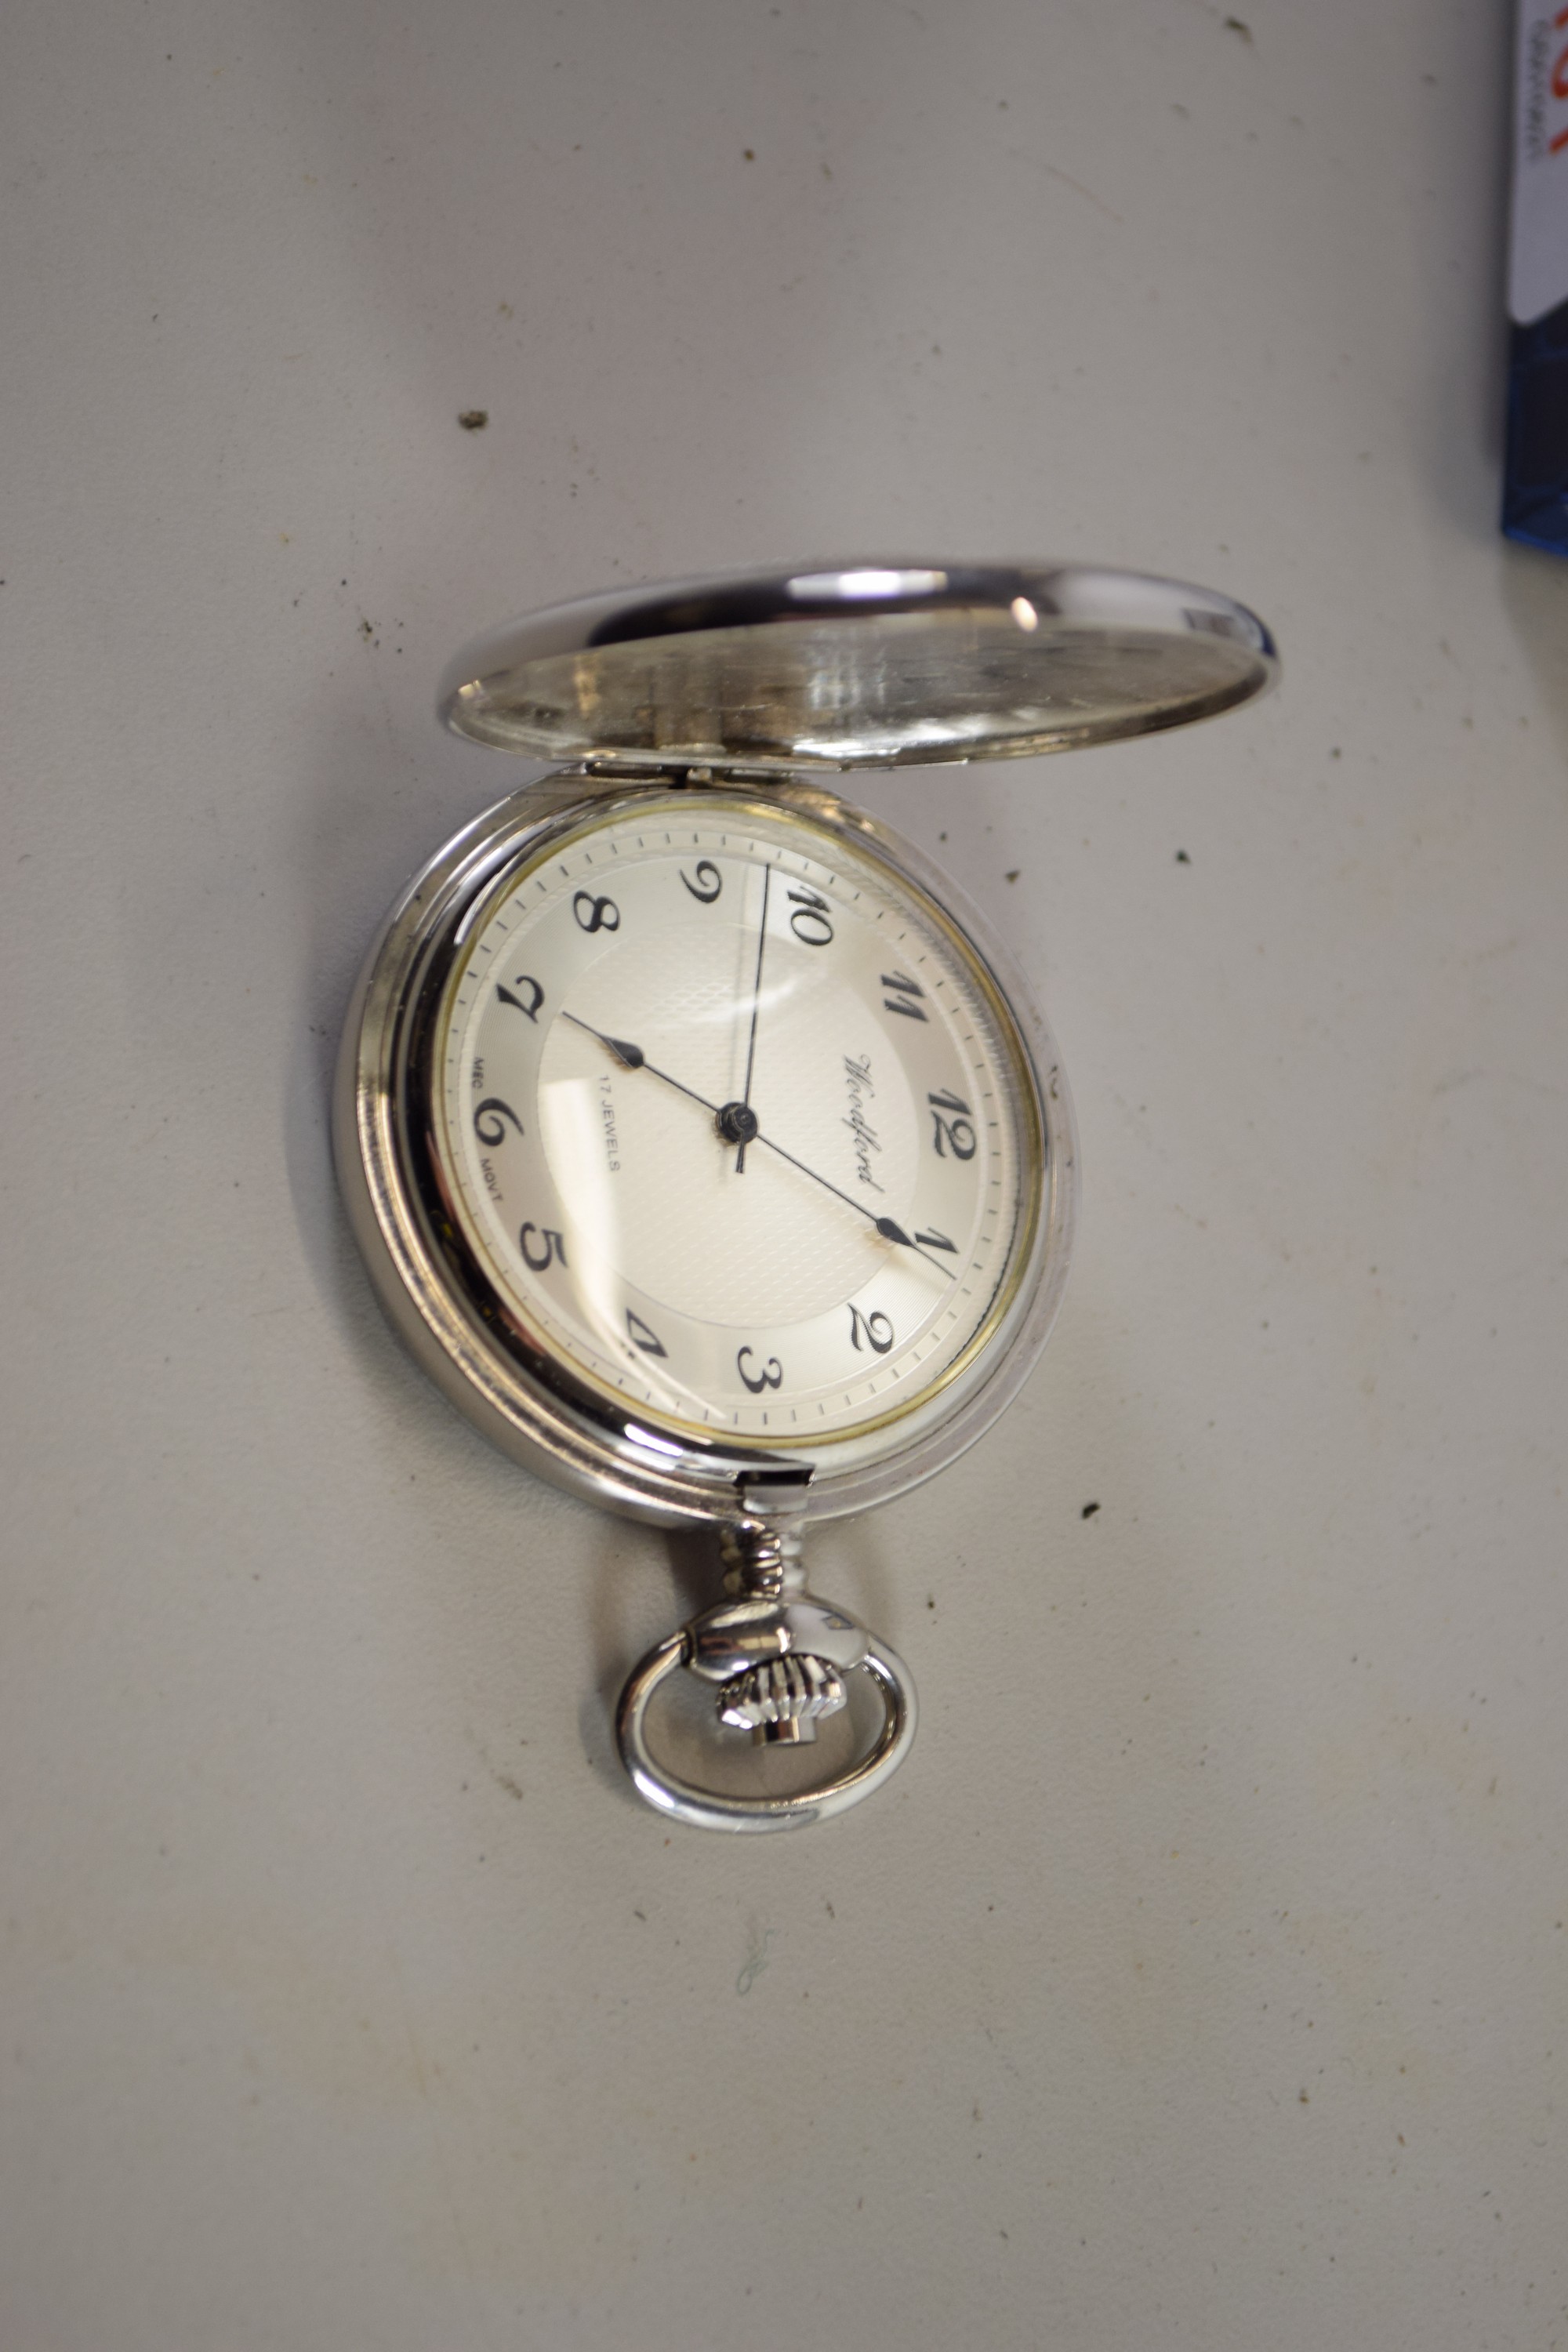 WOODFORD POCKET WATCH IN SILVER METAL CASE - Image 2 of 2